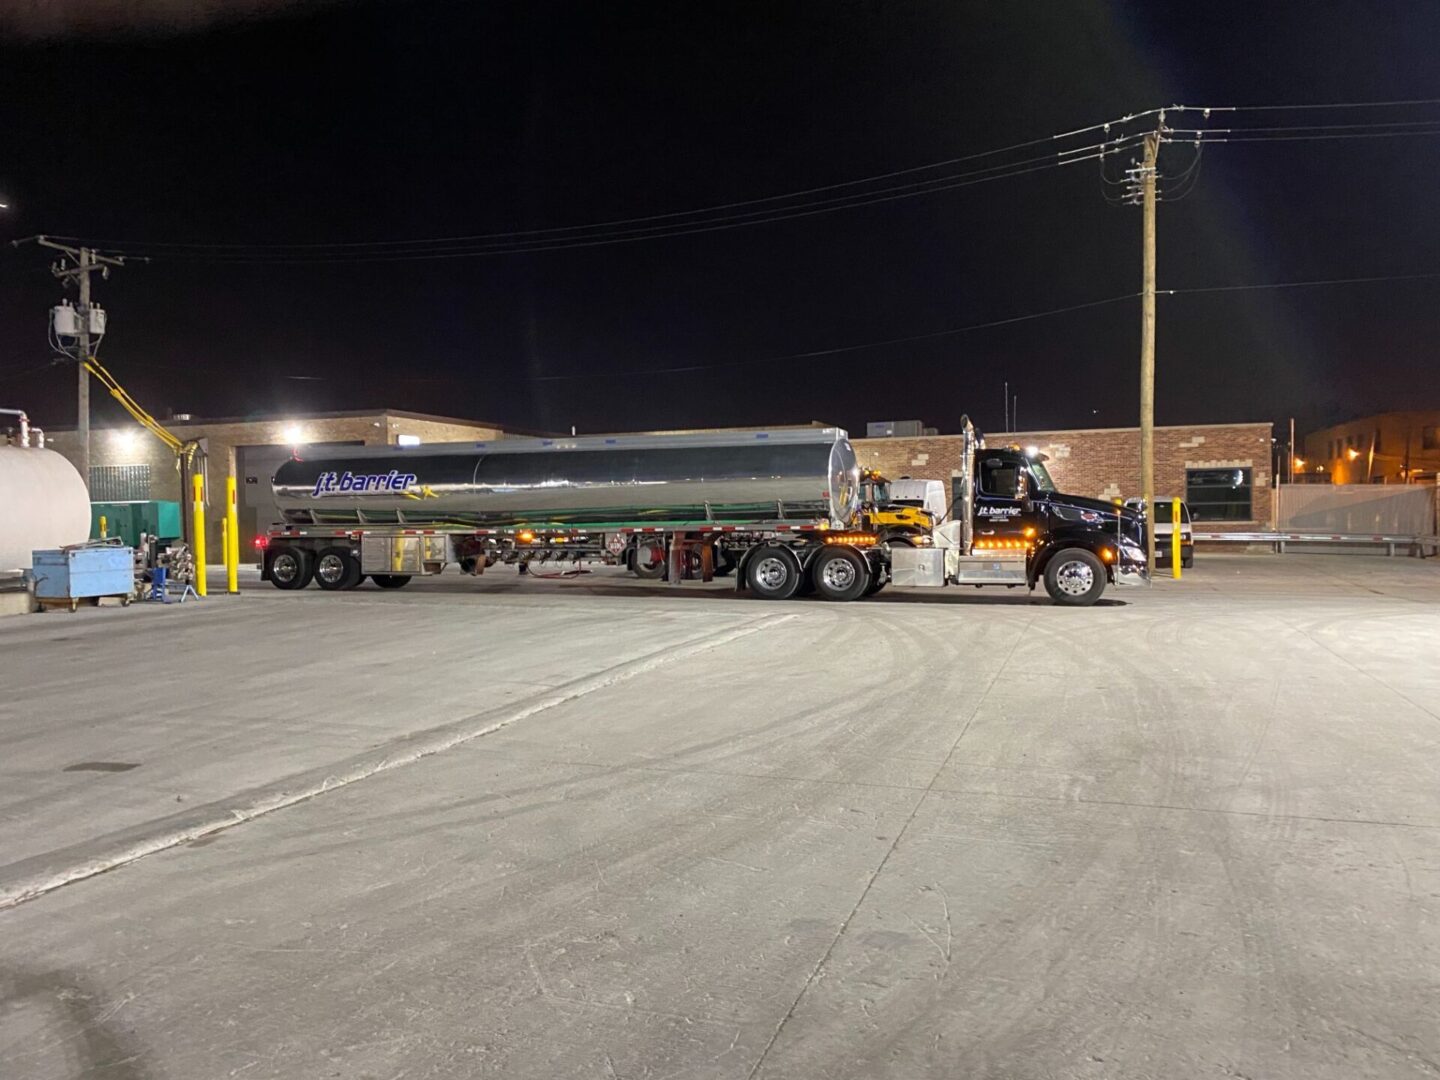 A large truck parked in a parking lot at night.